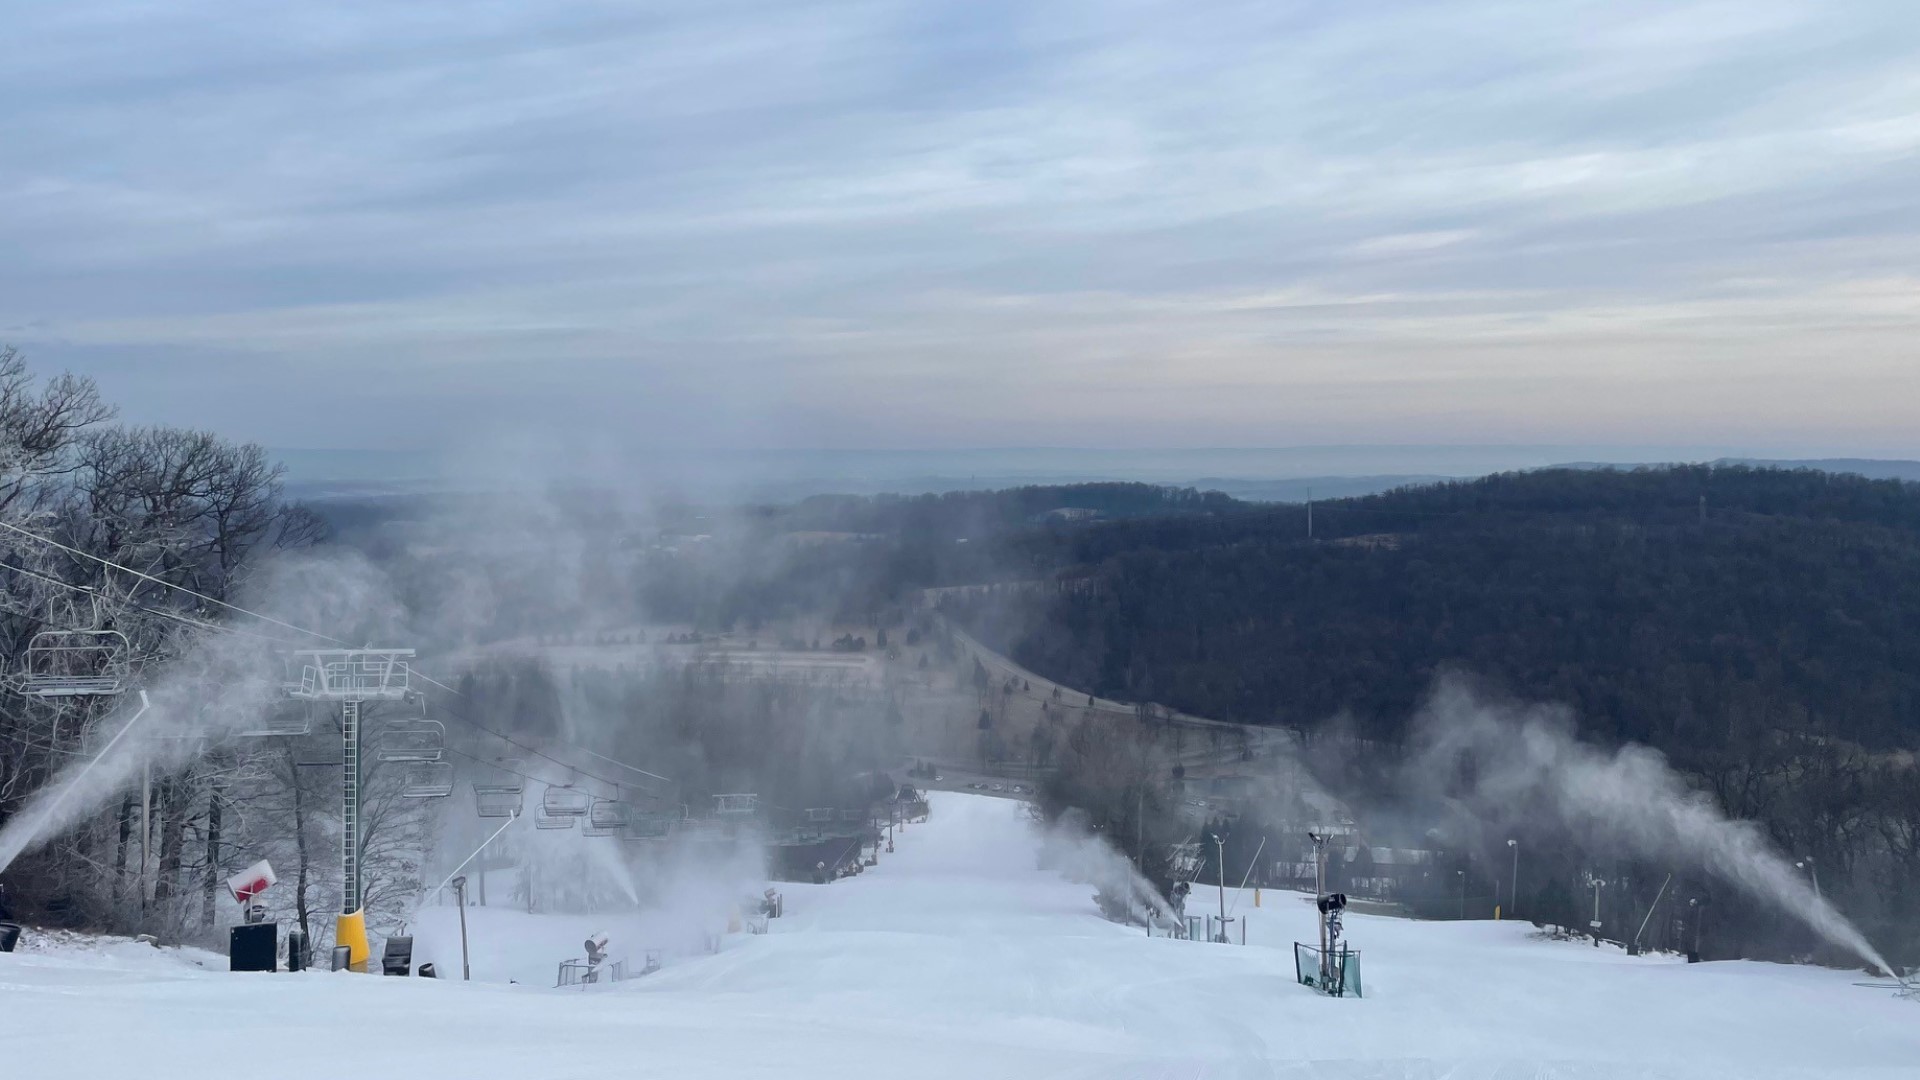 Roundtop Mountain Resort is getting ready for their first Winter Carnival. The event will be on Saturday, Feb. 11 and run all day.